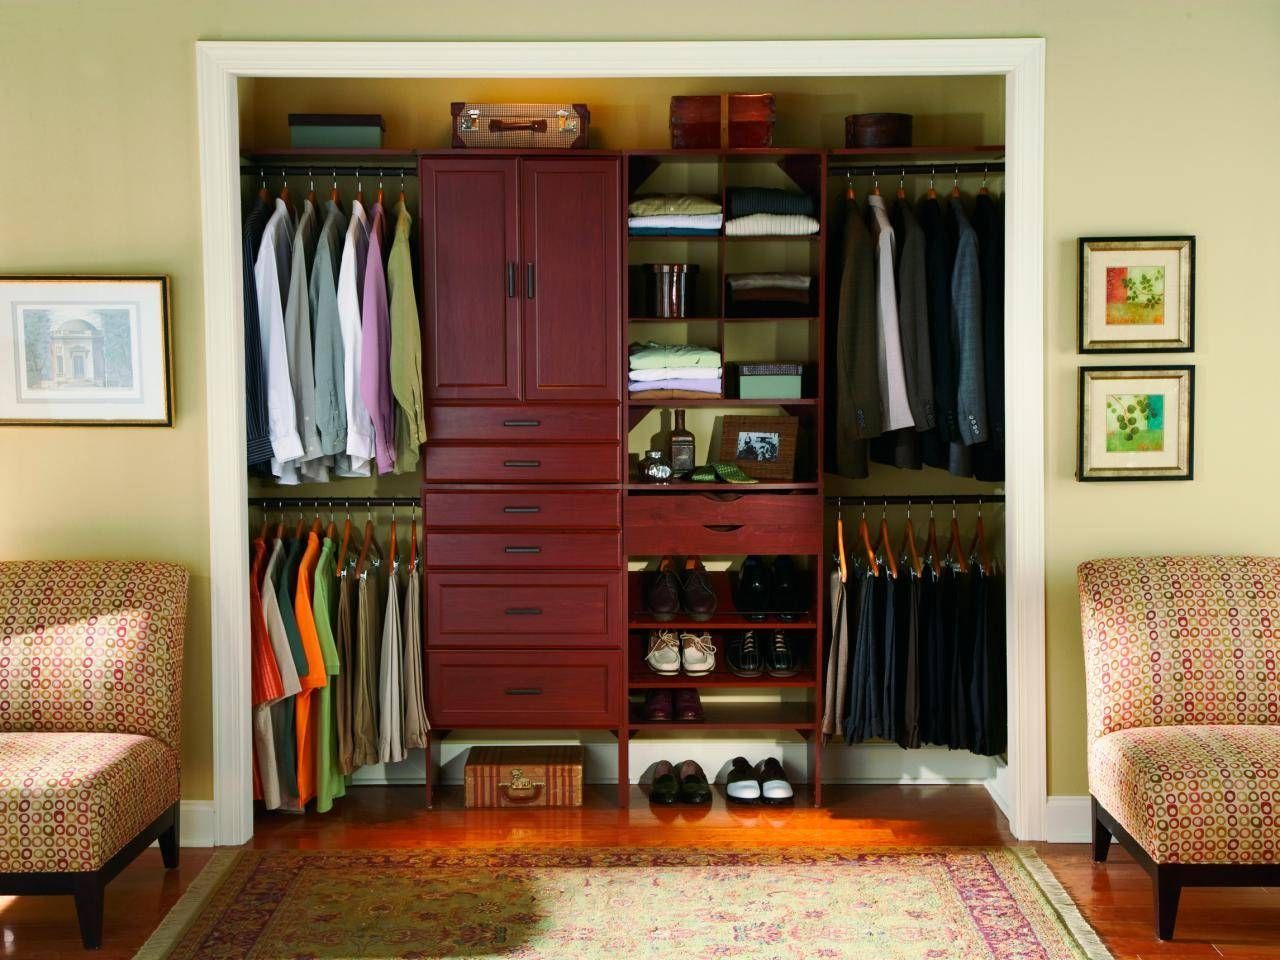 Bedroom : Small Closet Organization Ideas Pictures Options Tips With Bedroom Wardrobe Storages (View 9 of 30)